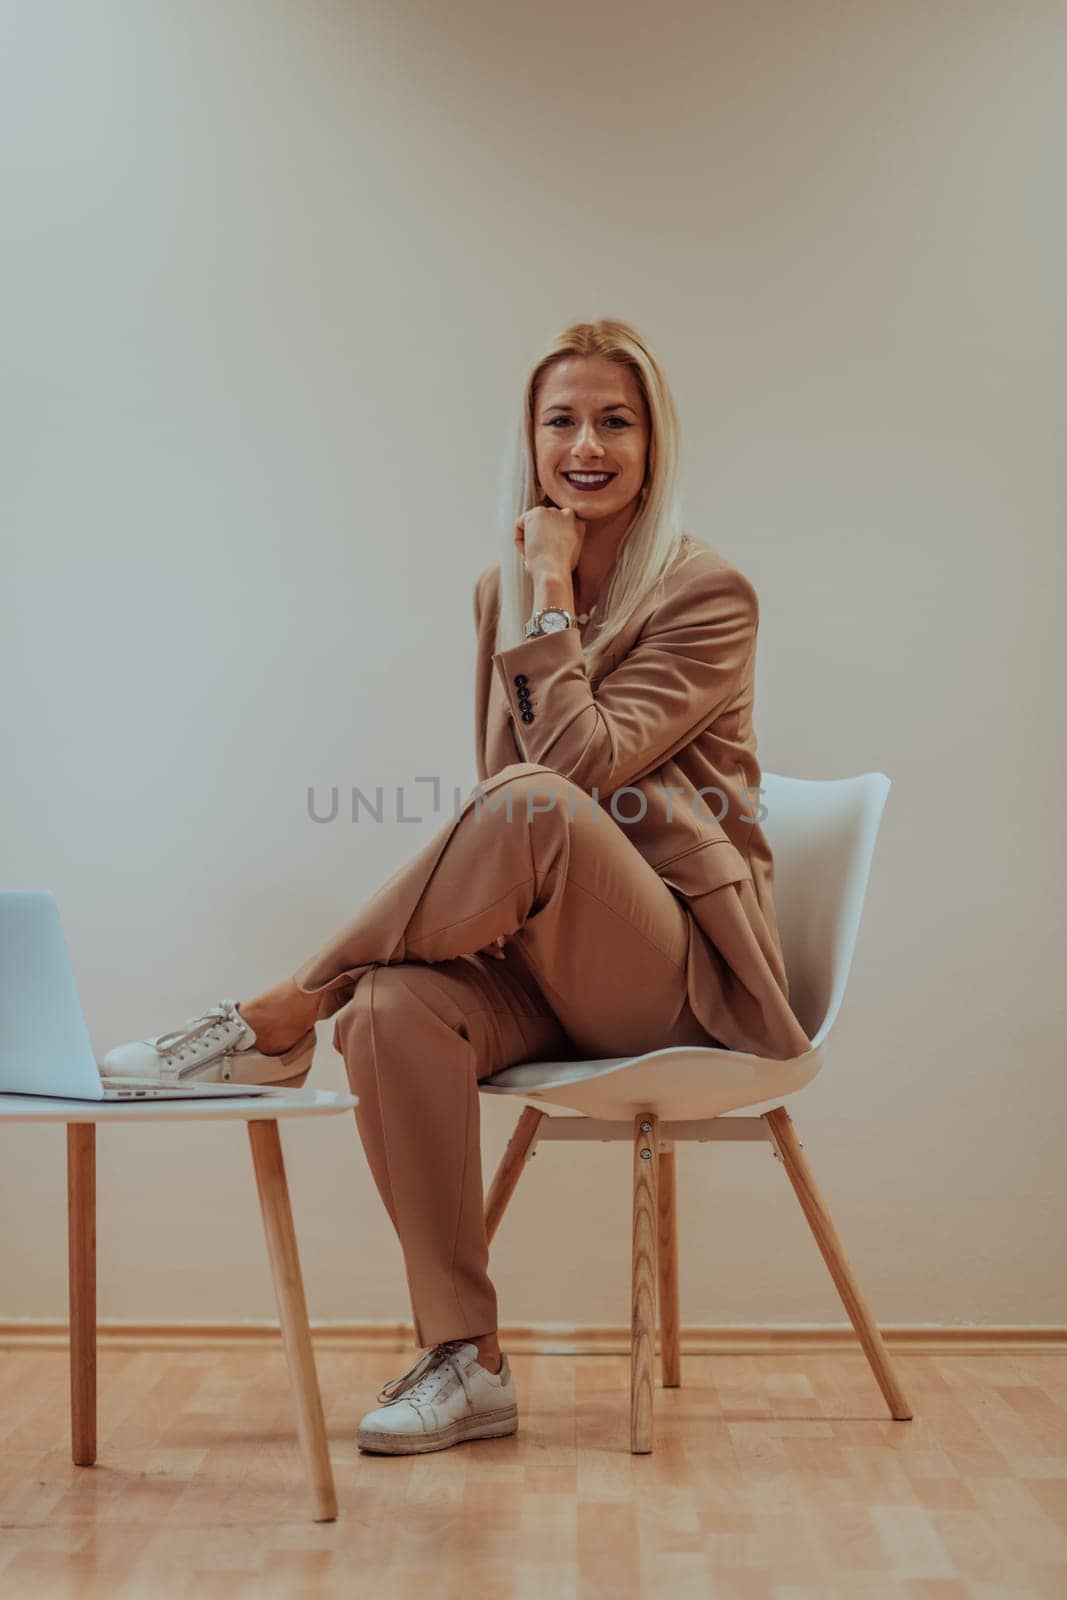 A professional businesswoman sits on a chair, surrounded by a serene beige background, diligently working on her laptop, showcasing dedication and focus in her pursuit of success.